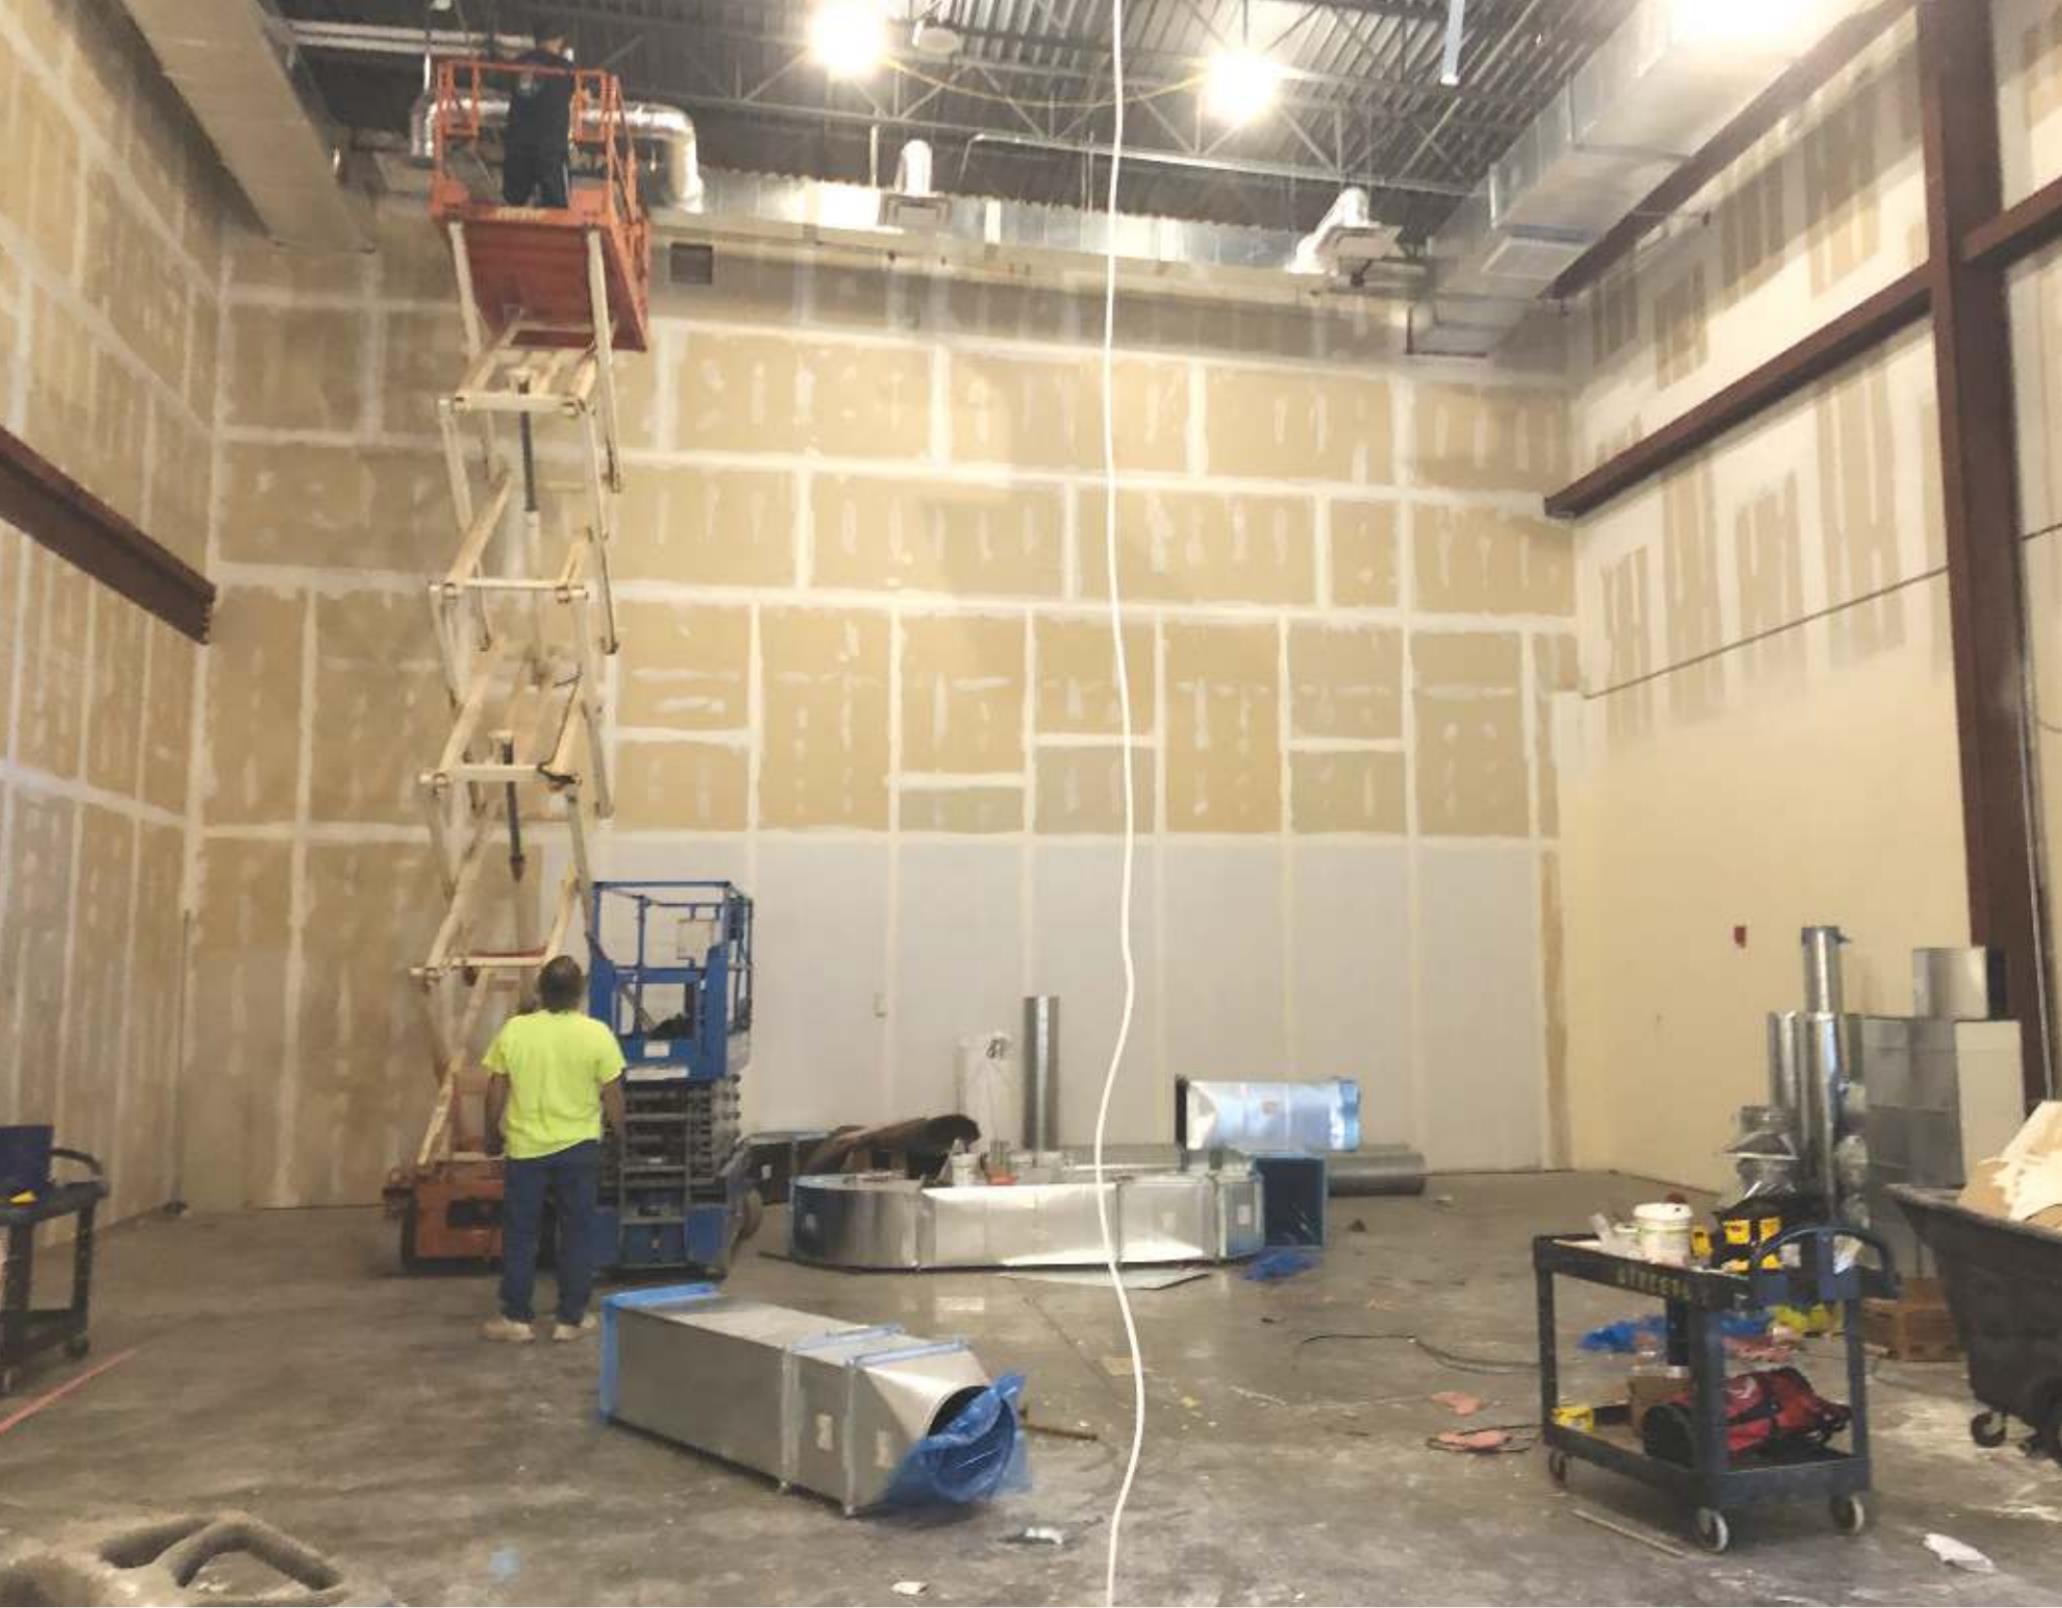 Montgomery Malone/WDN Crews continue with construction on the esports arena, inside the Wellness Center on the Southwestern Oklahoma State University campus.